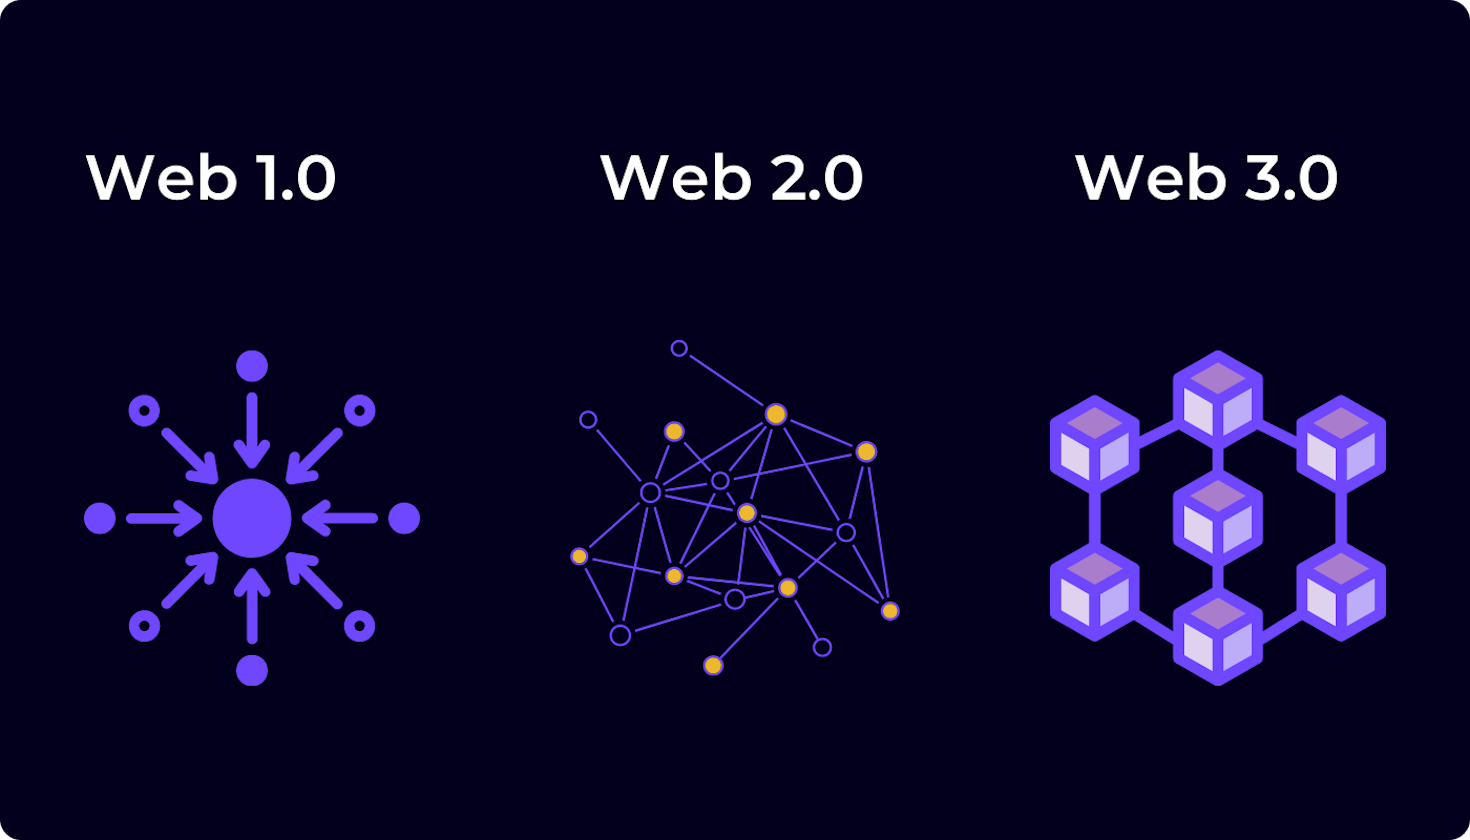 "Pioneering the Future: Web 3.0 Implementation by Technothinksup"